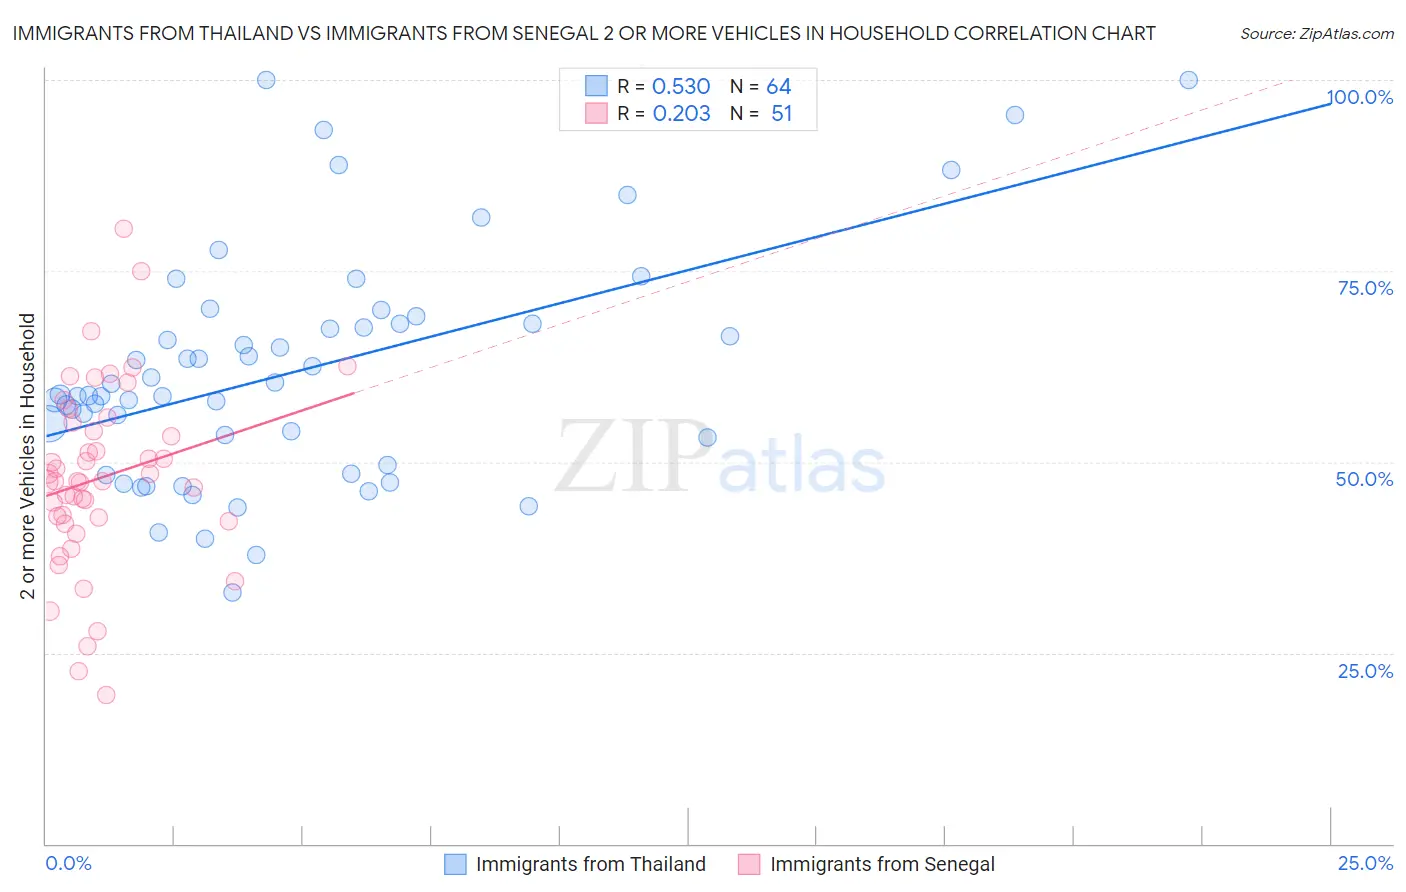 Immigrants from Thailand vs Immigrants from Senegal 2 or more Vehicles in Household